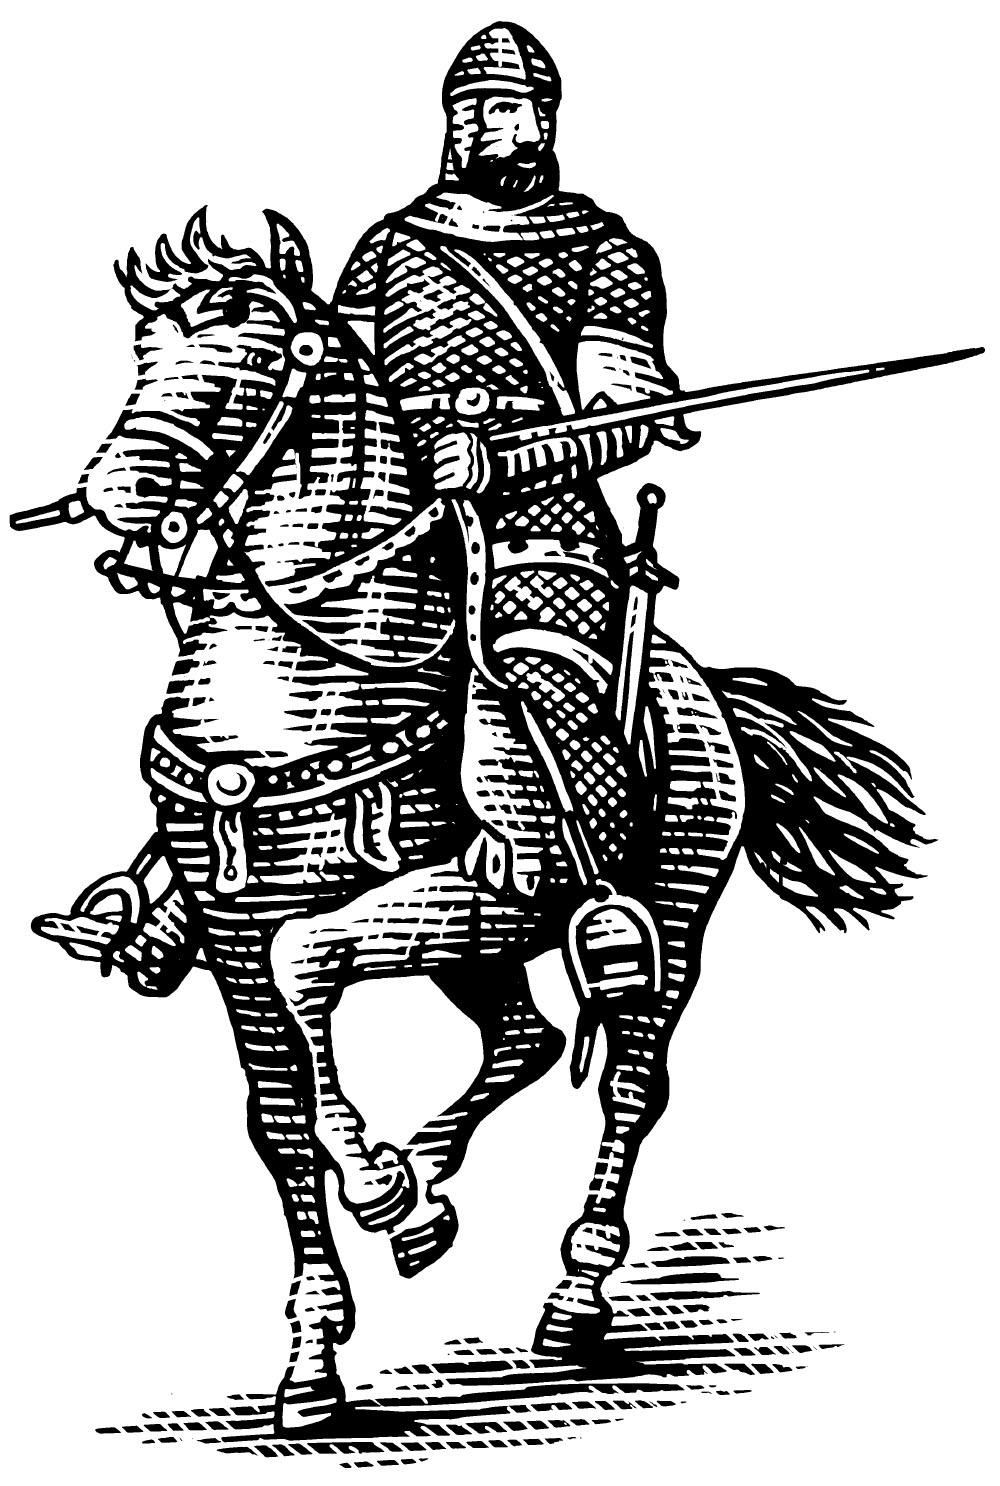 An illustration of a knight riding a horse